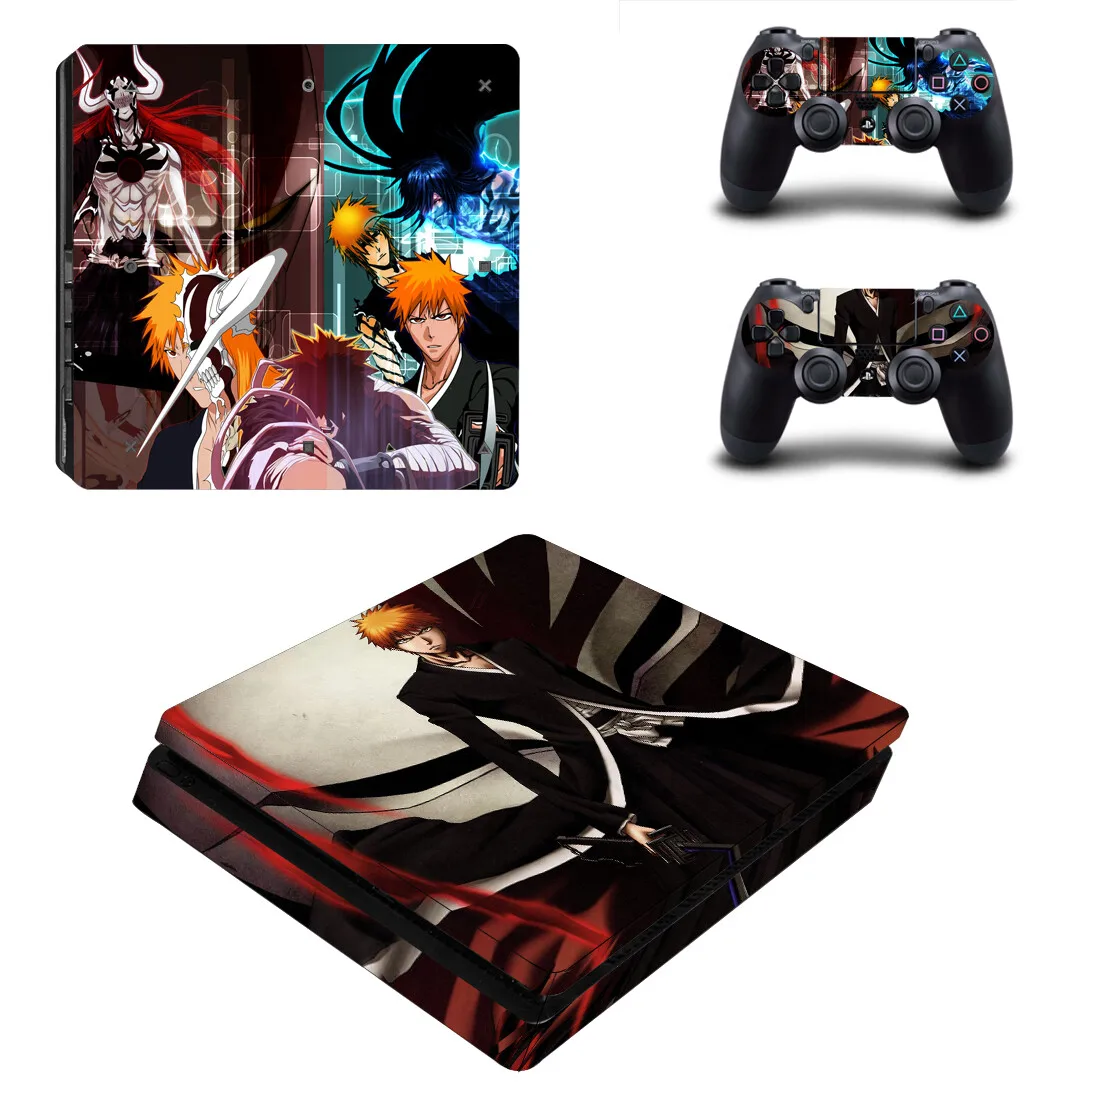 

BLEACH PS4 Slim Skin Sticker For Sony PlayStation 4 Console and Controllers PS4 Slim Skins Sticker Decal Vinyl